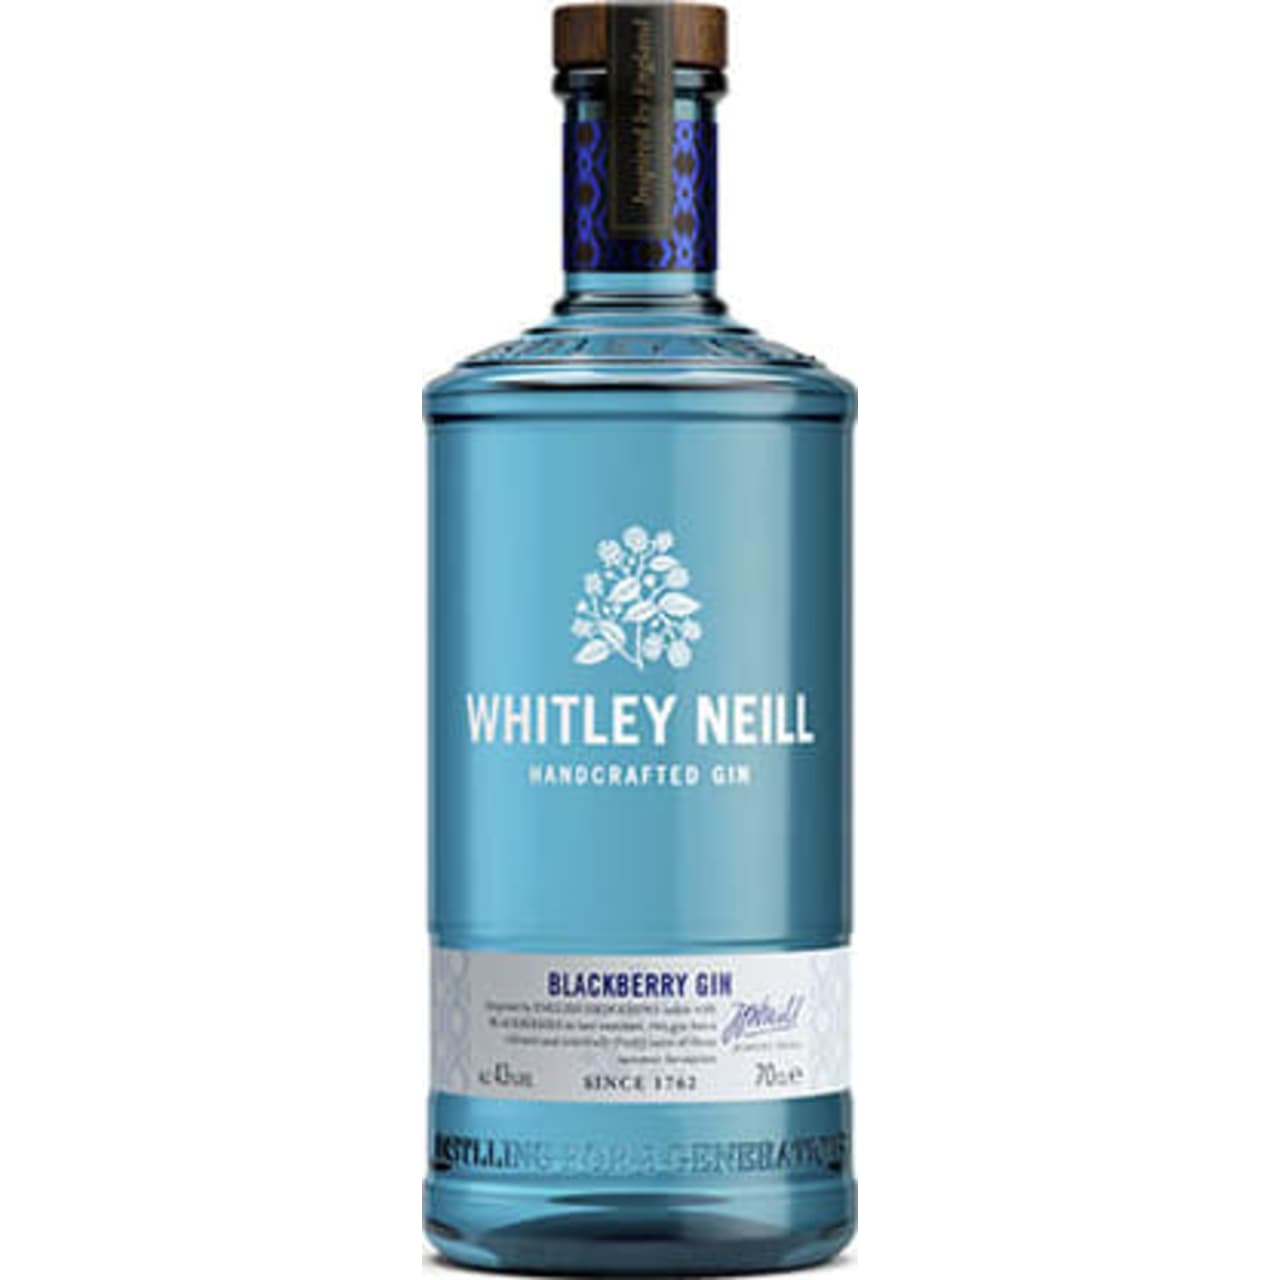 Inspired by the hedgerows in rural England, Whitley Neill Blackberry Gin takes the signature botanical a supercharges it for this Flavoured gin.